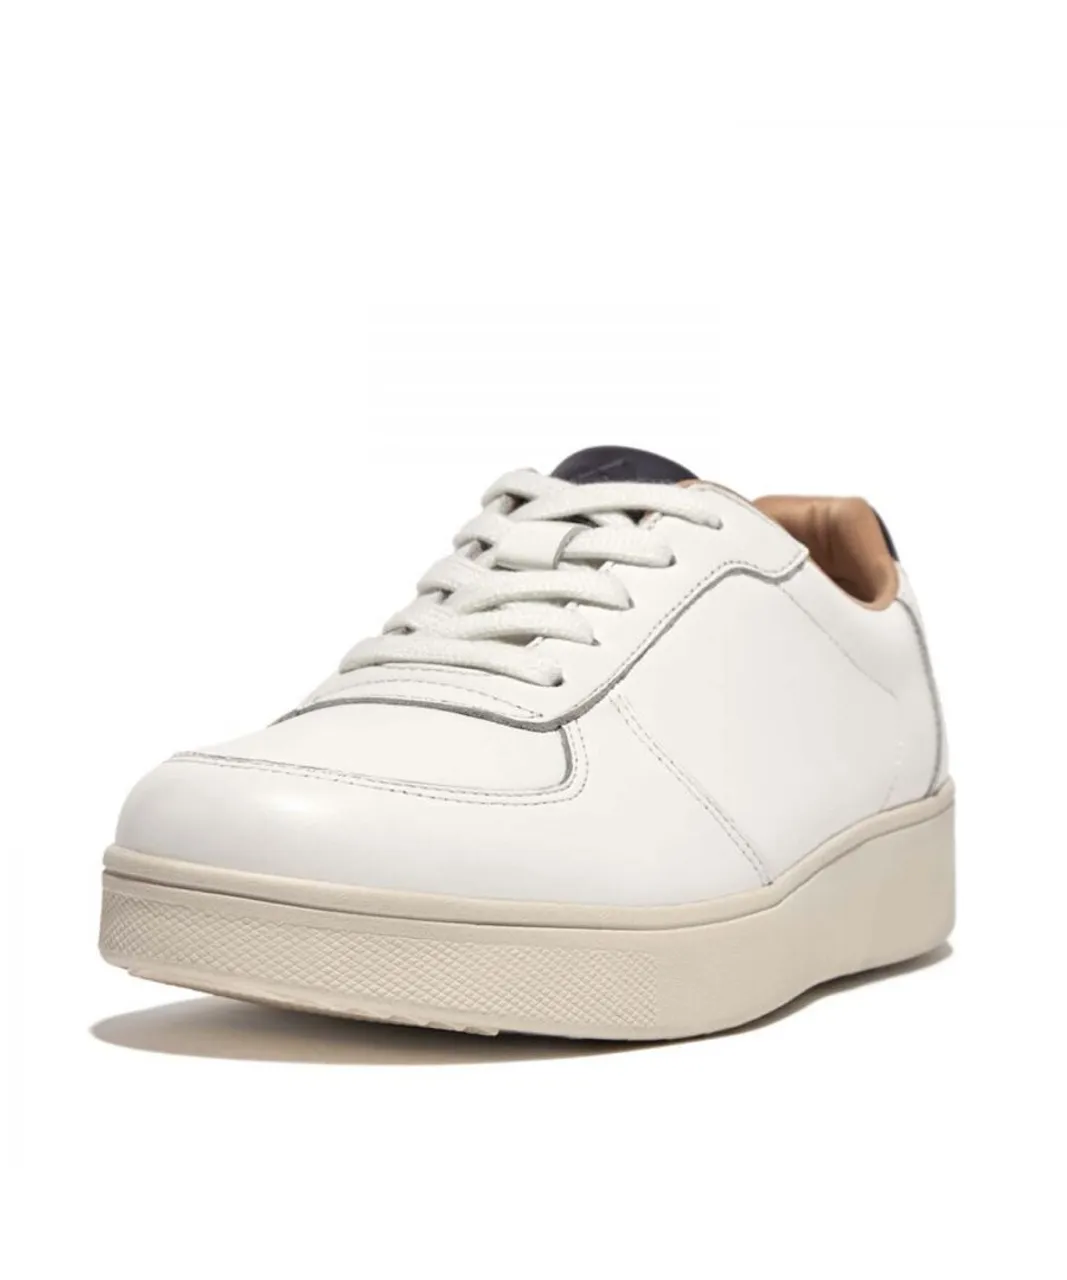 Fitflop Womenss Fit Flop Rally Leather Panel Trainers in White Navy - Blue & White Leather (archived)